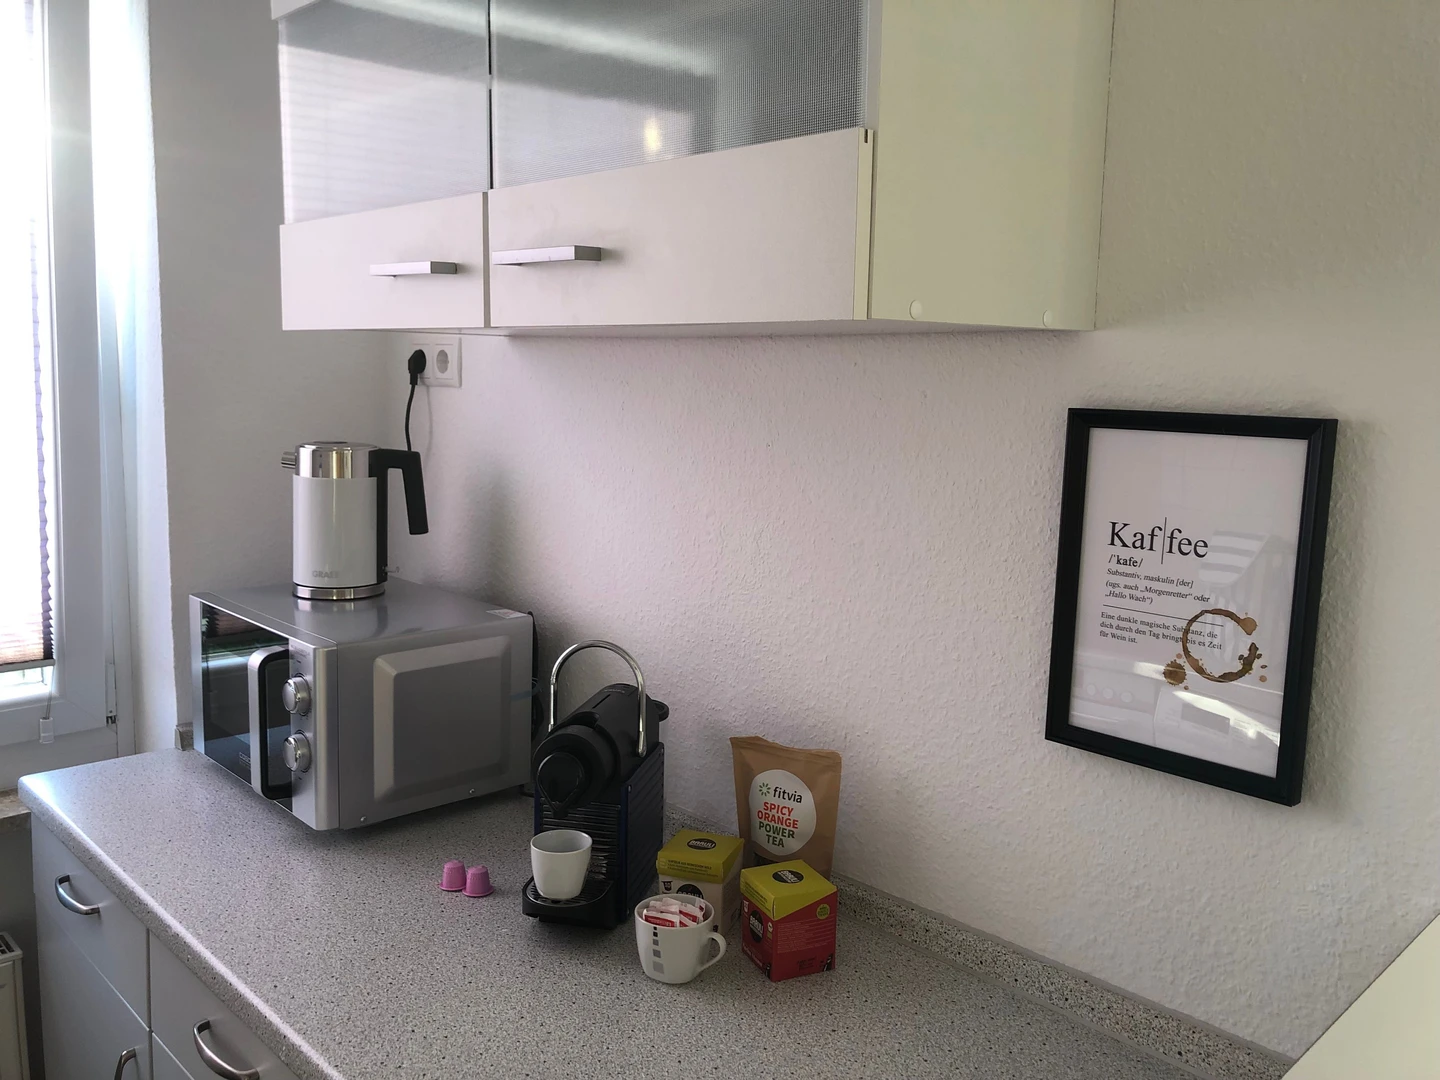 Room for rent in a shared flat in koblenz